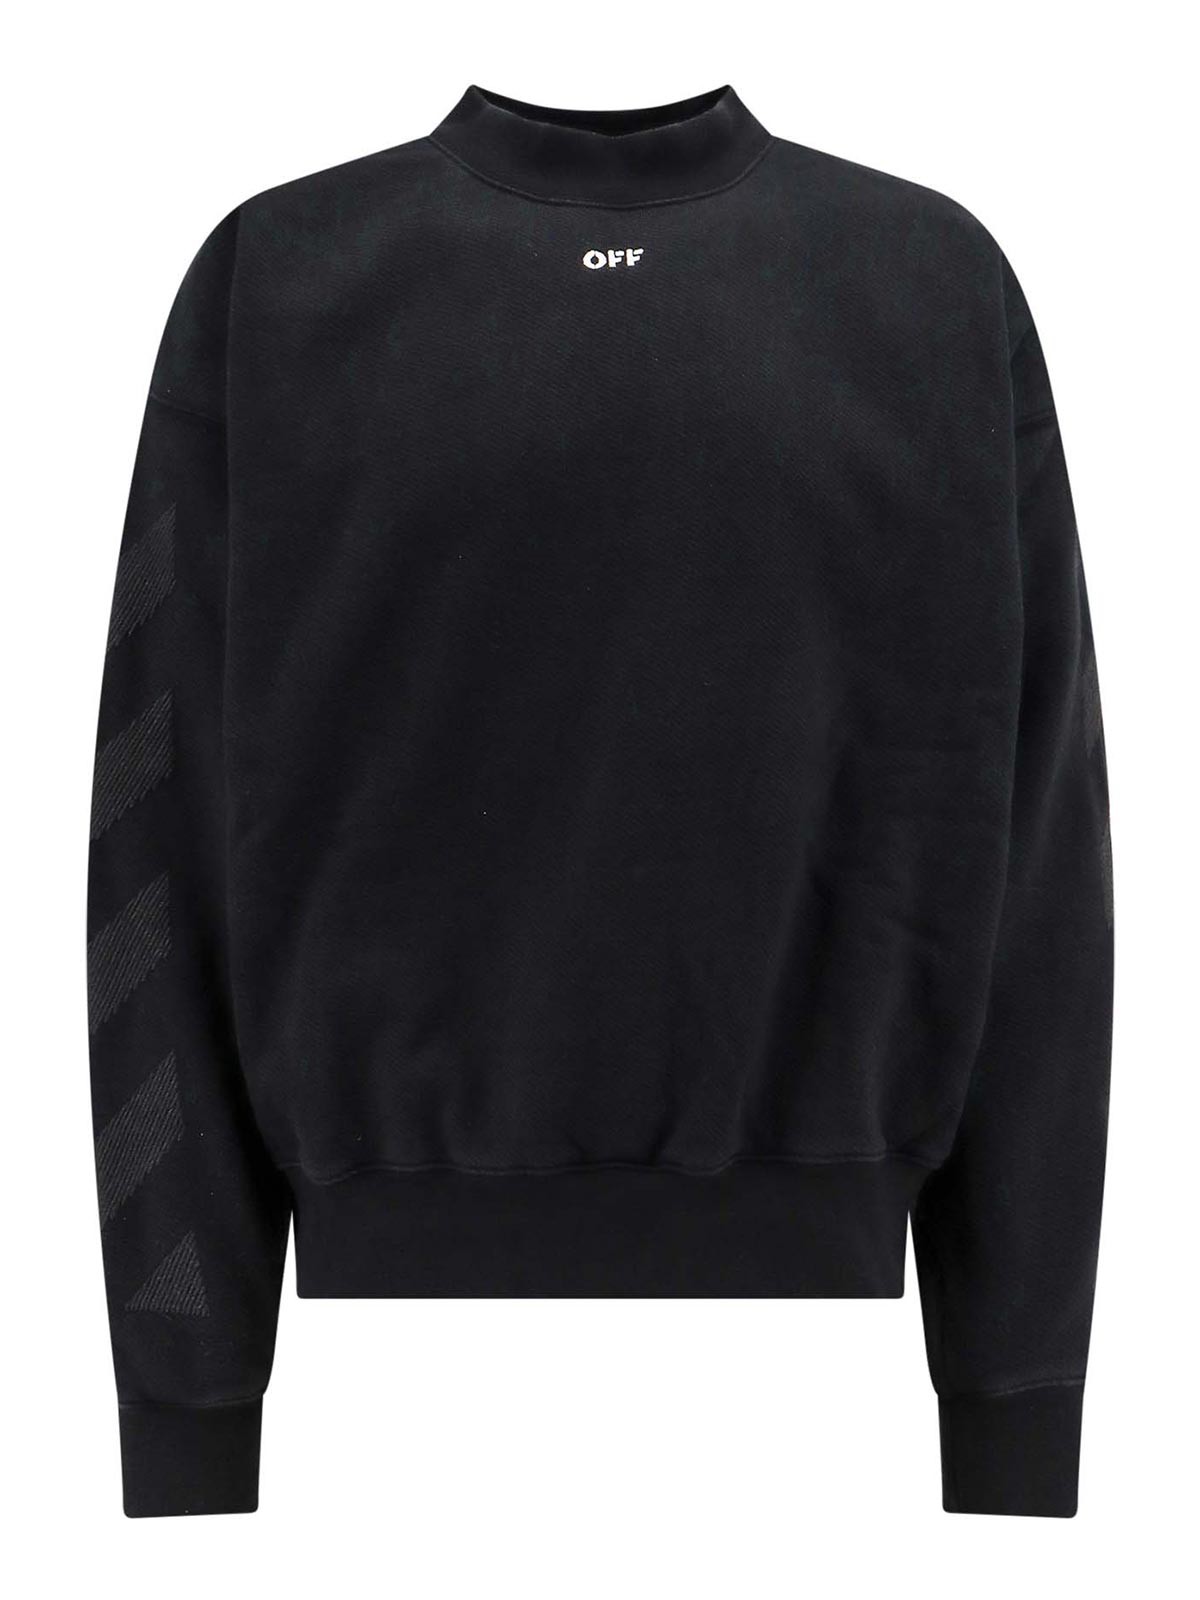 Shop Off-white Cotton Sweatshirt With Frontal Off Logo In Negro